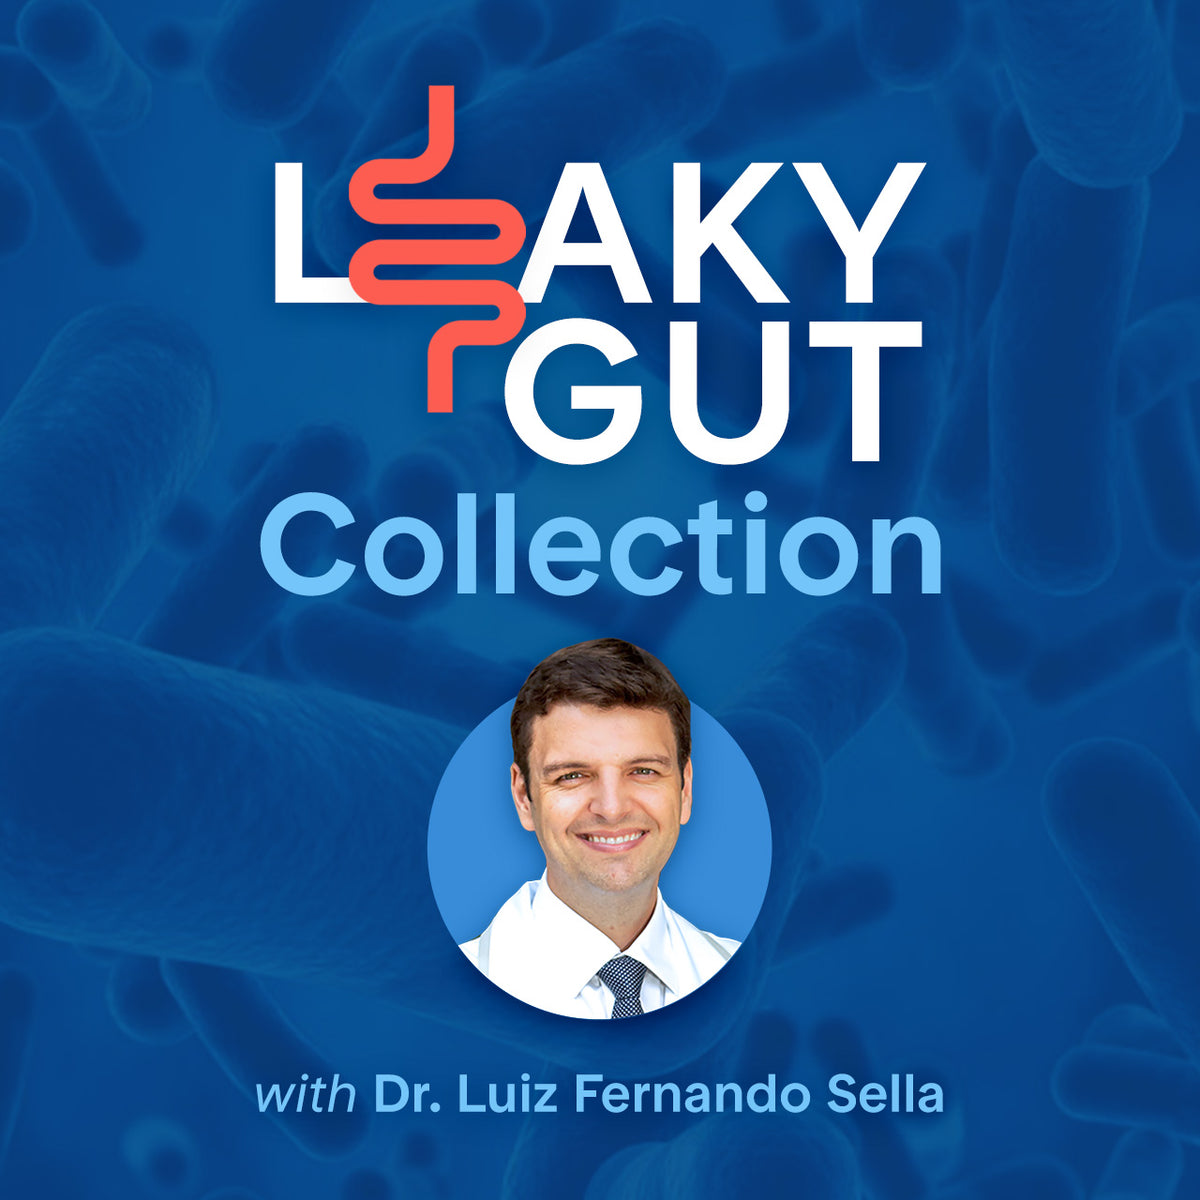 The Leaky Gut Collection